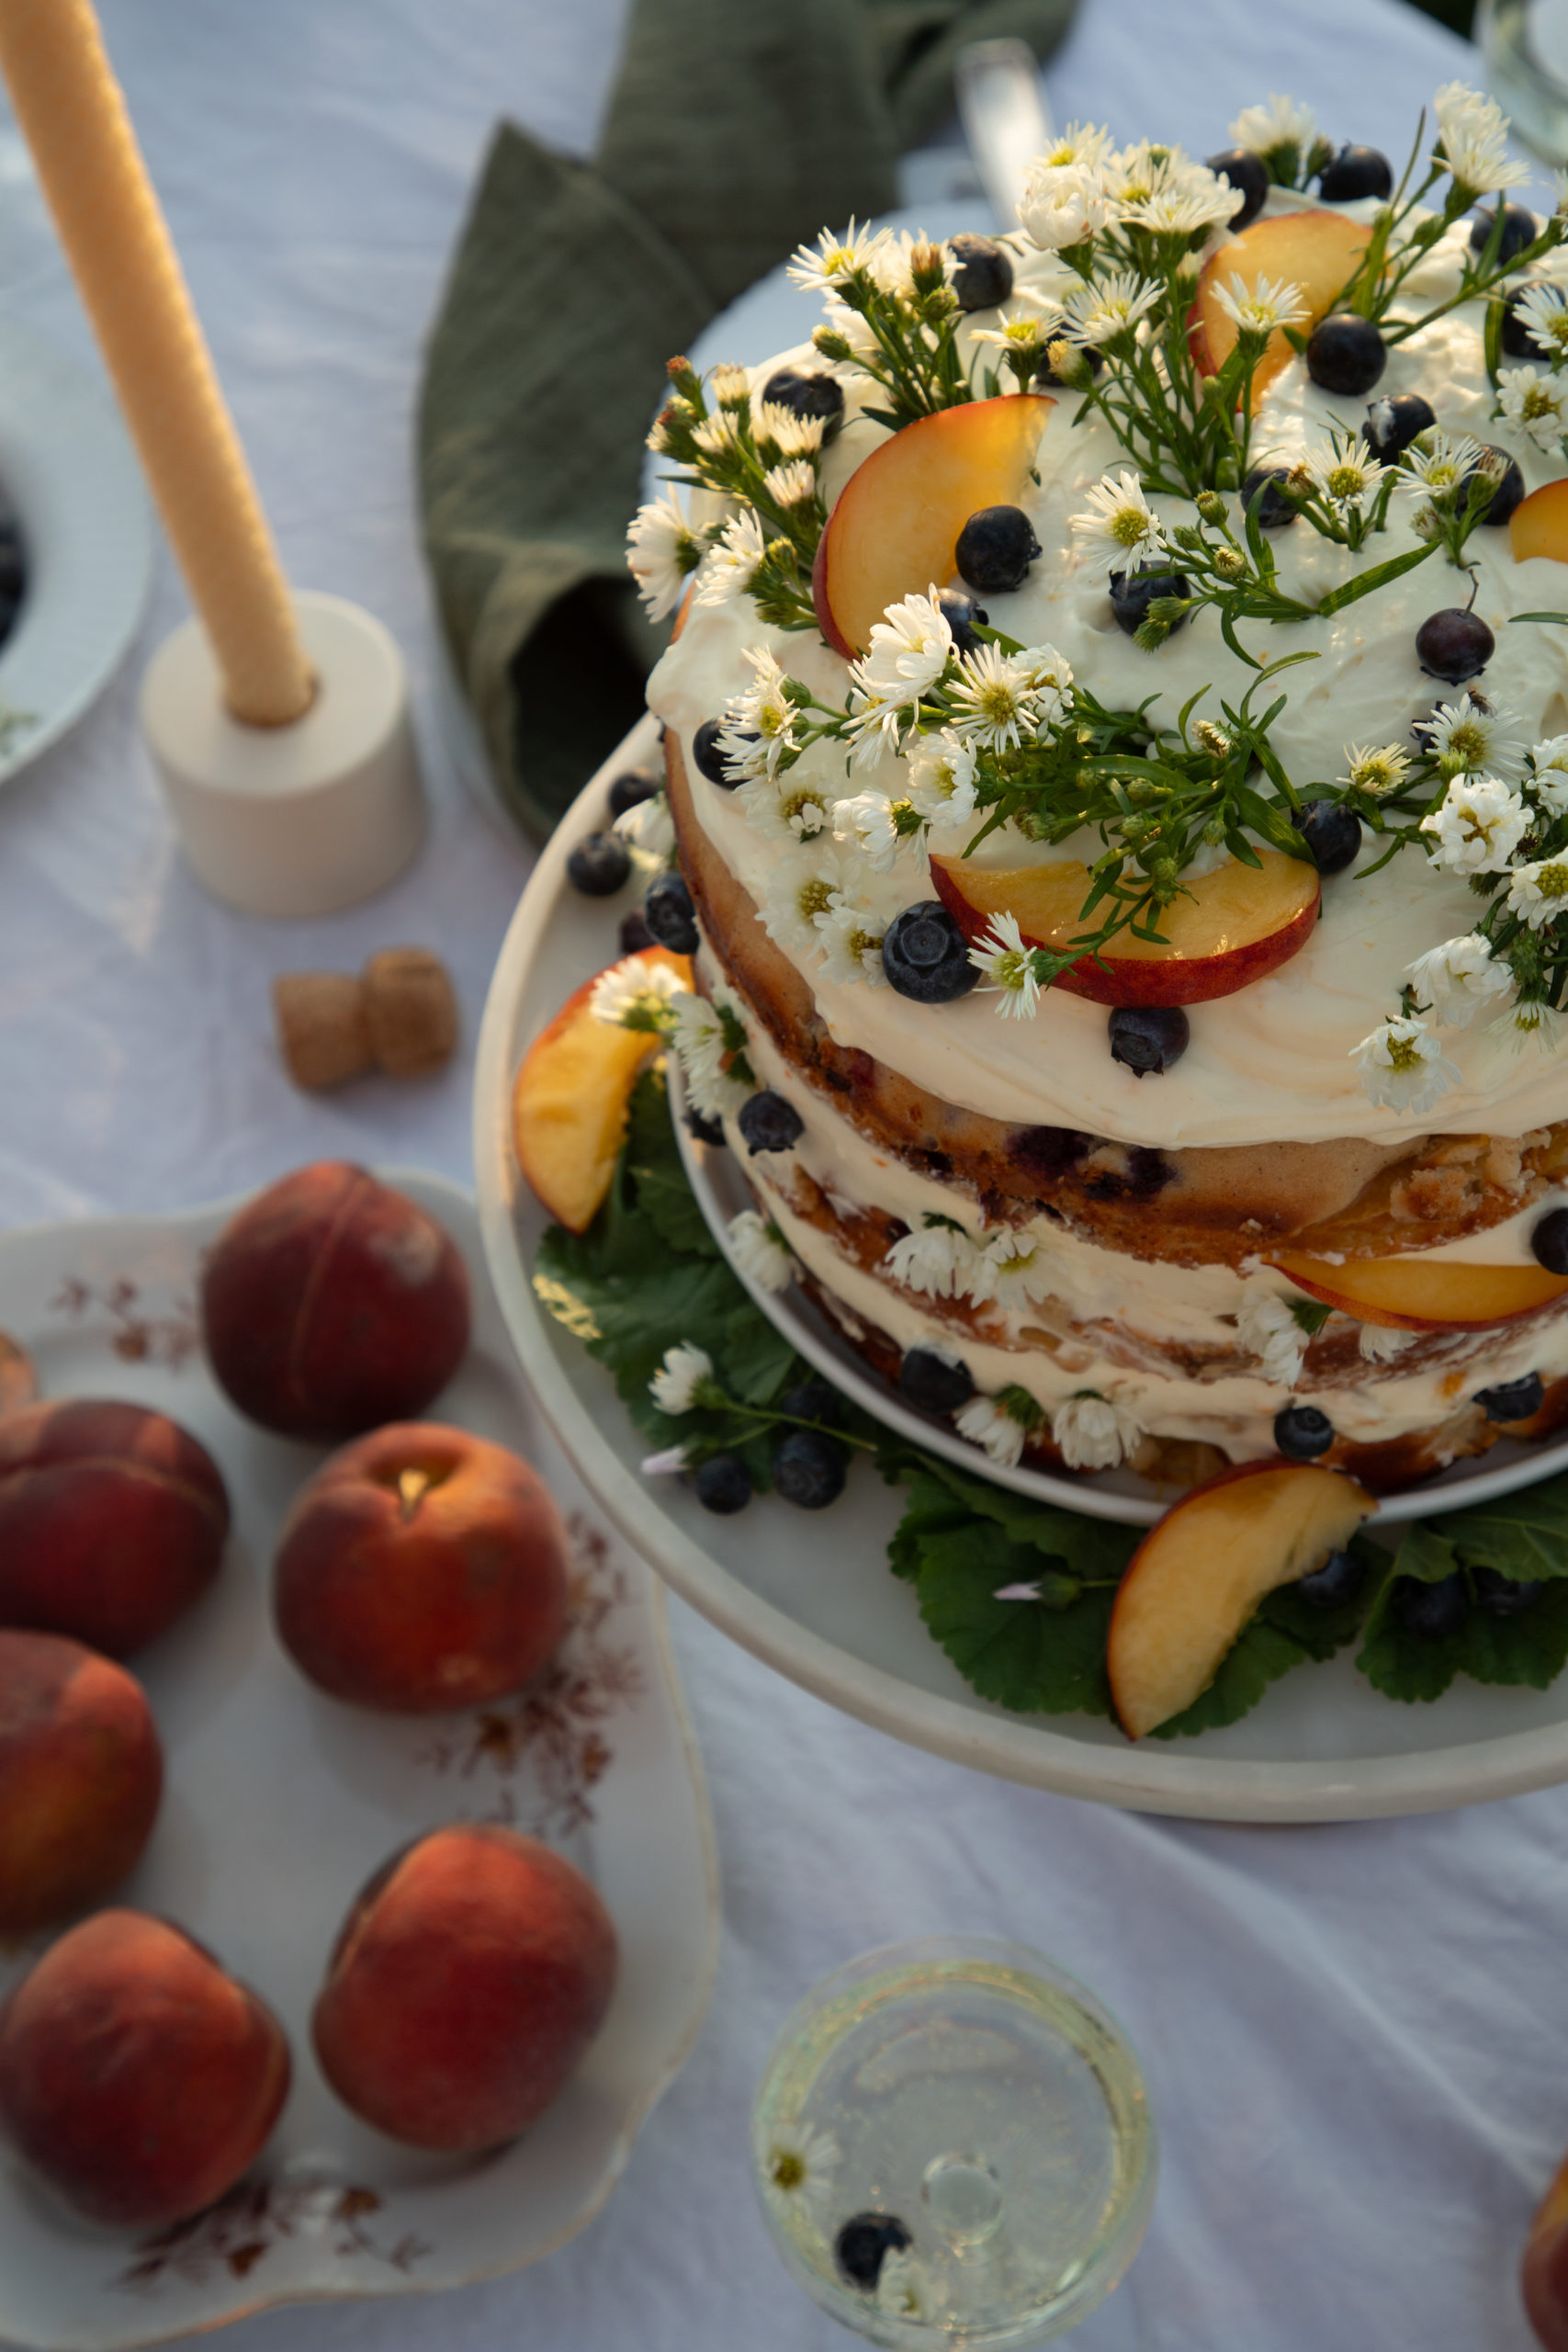 a close up photo of a a cake with whipped cream cheese frosting topped with peach slices, blueberries, and camomile flowers with peaches on the table in front of the cake